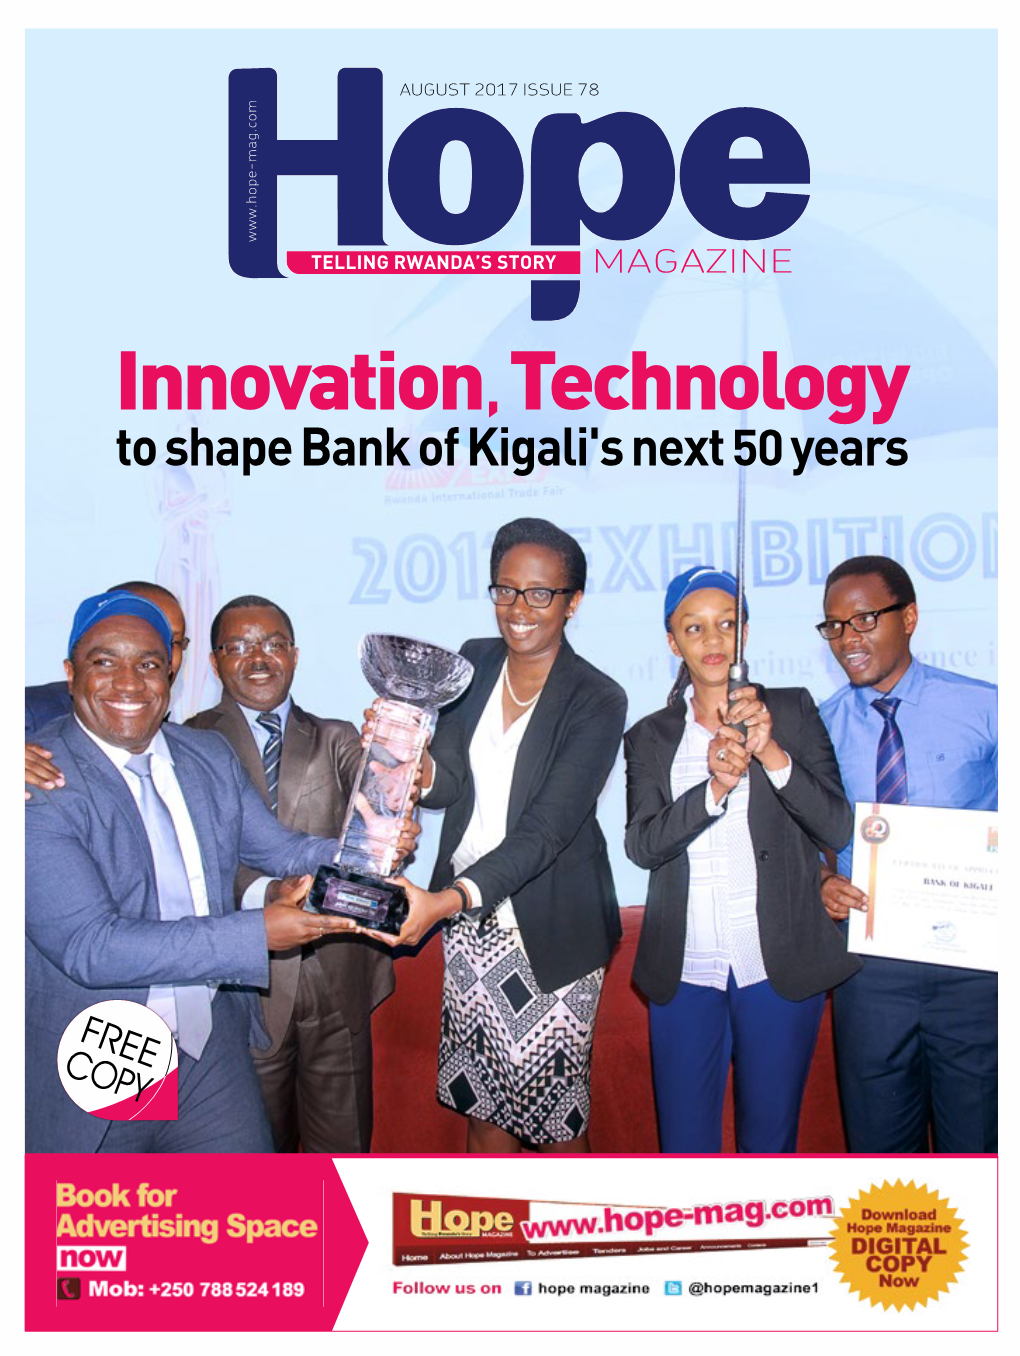 Innovation, Technology to Shape Bank of Kigali's Next 50 Years